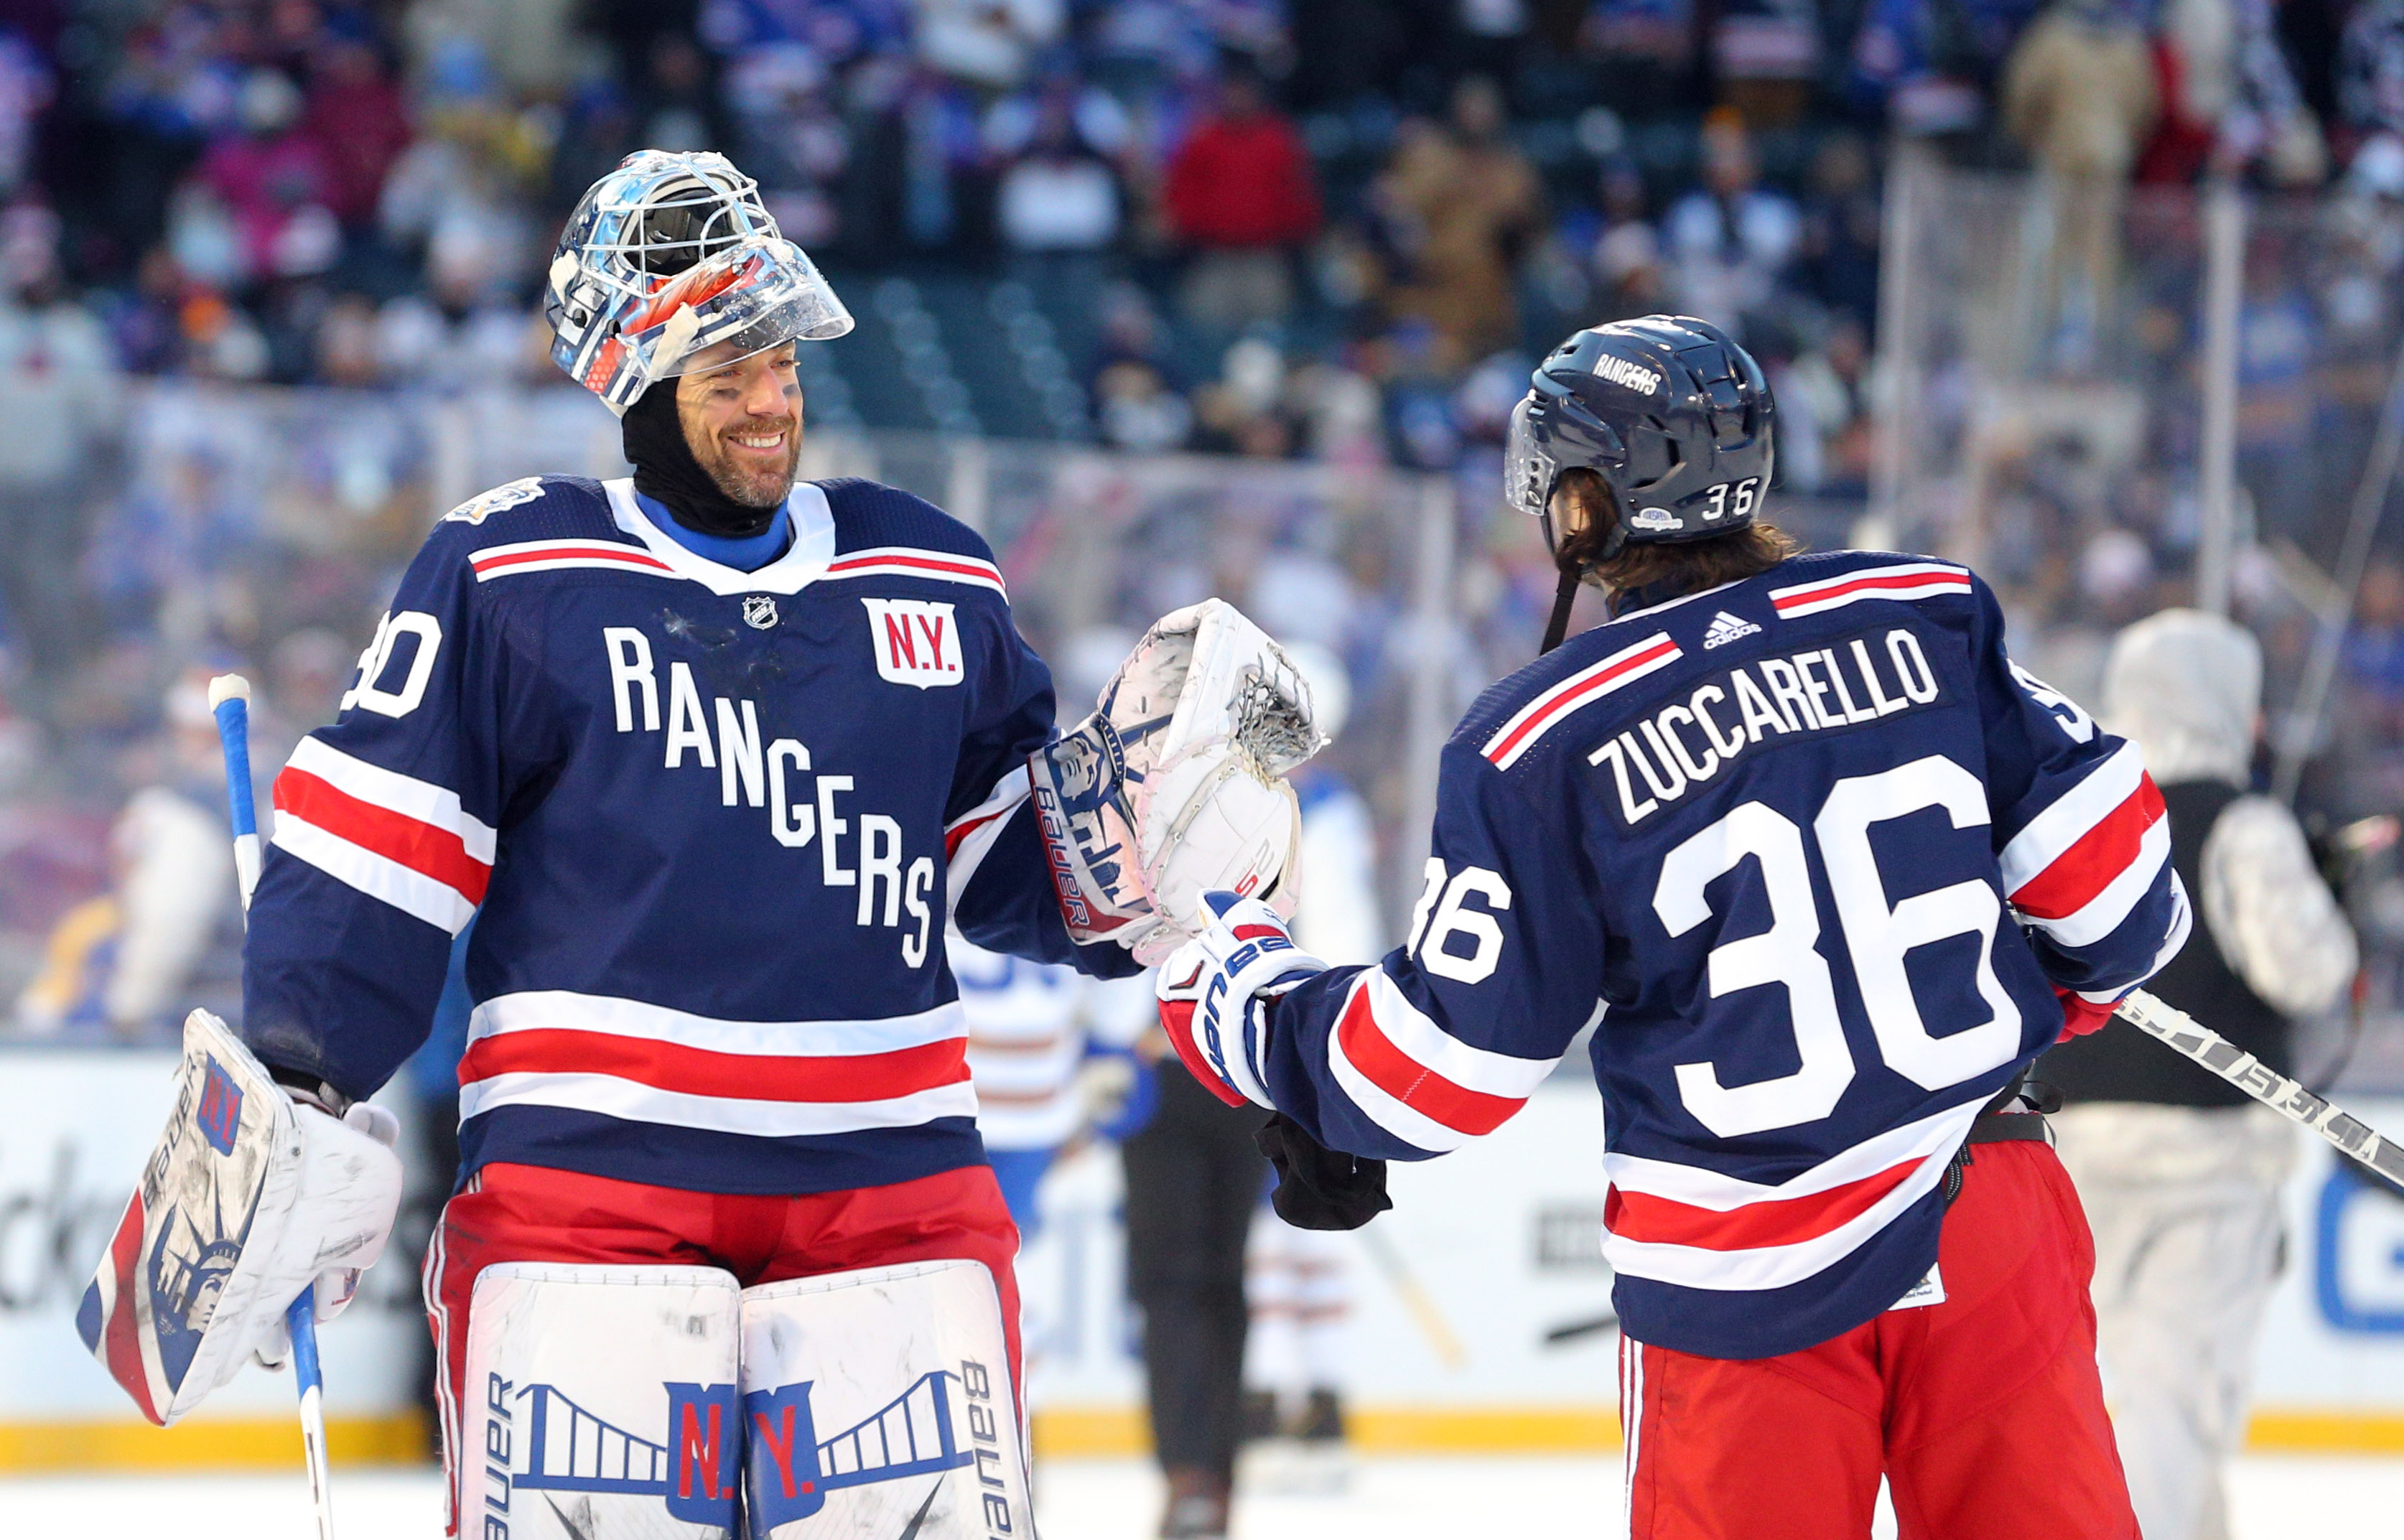 Lundqvist called Mats Zuccarello his “annoying little brother